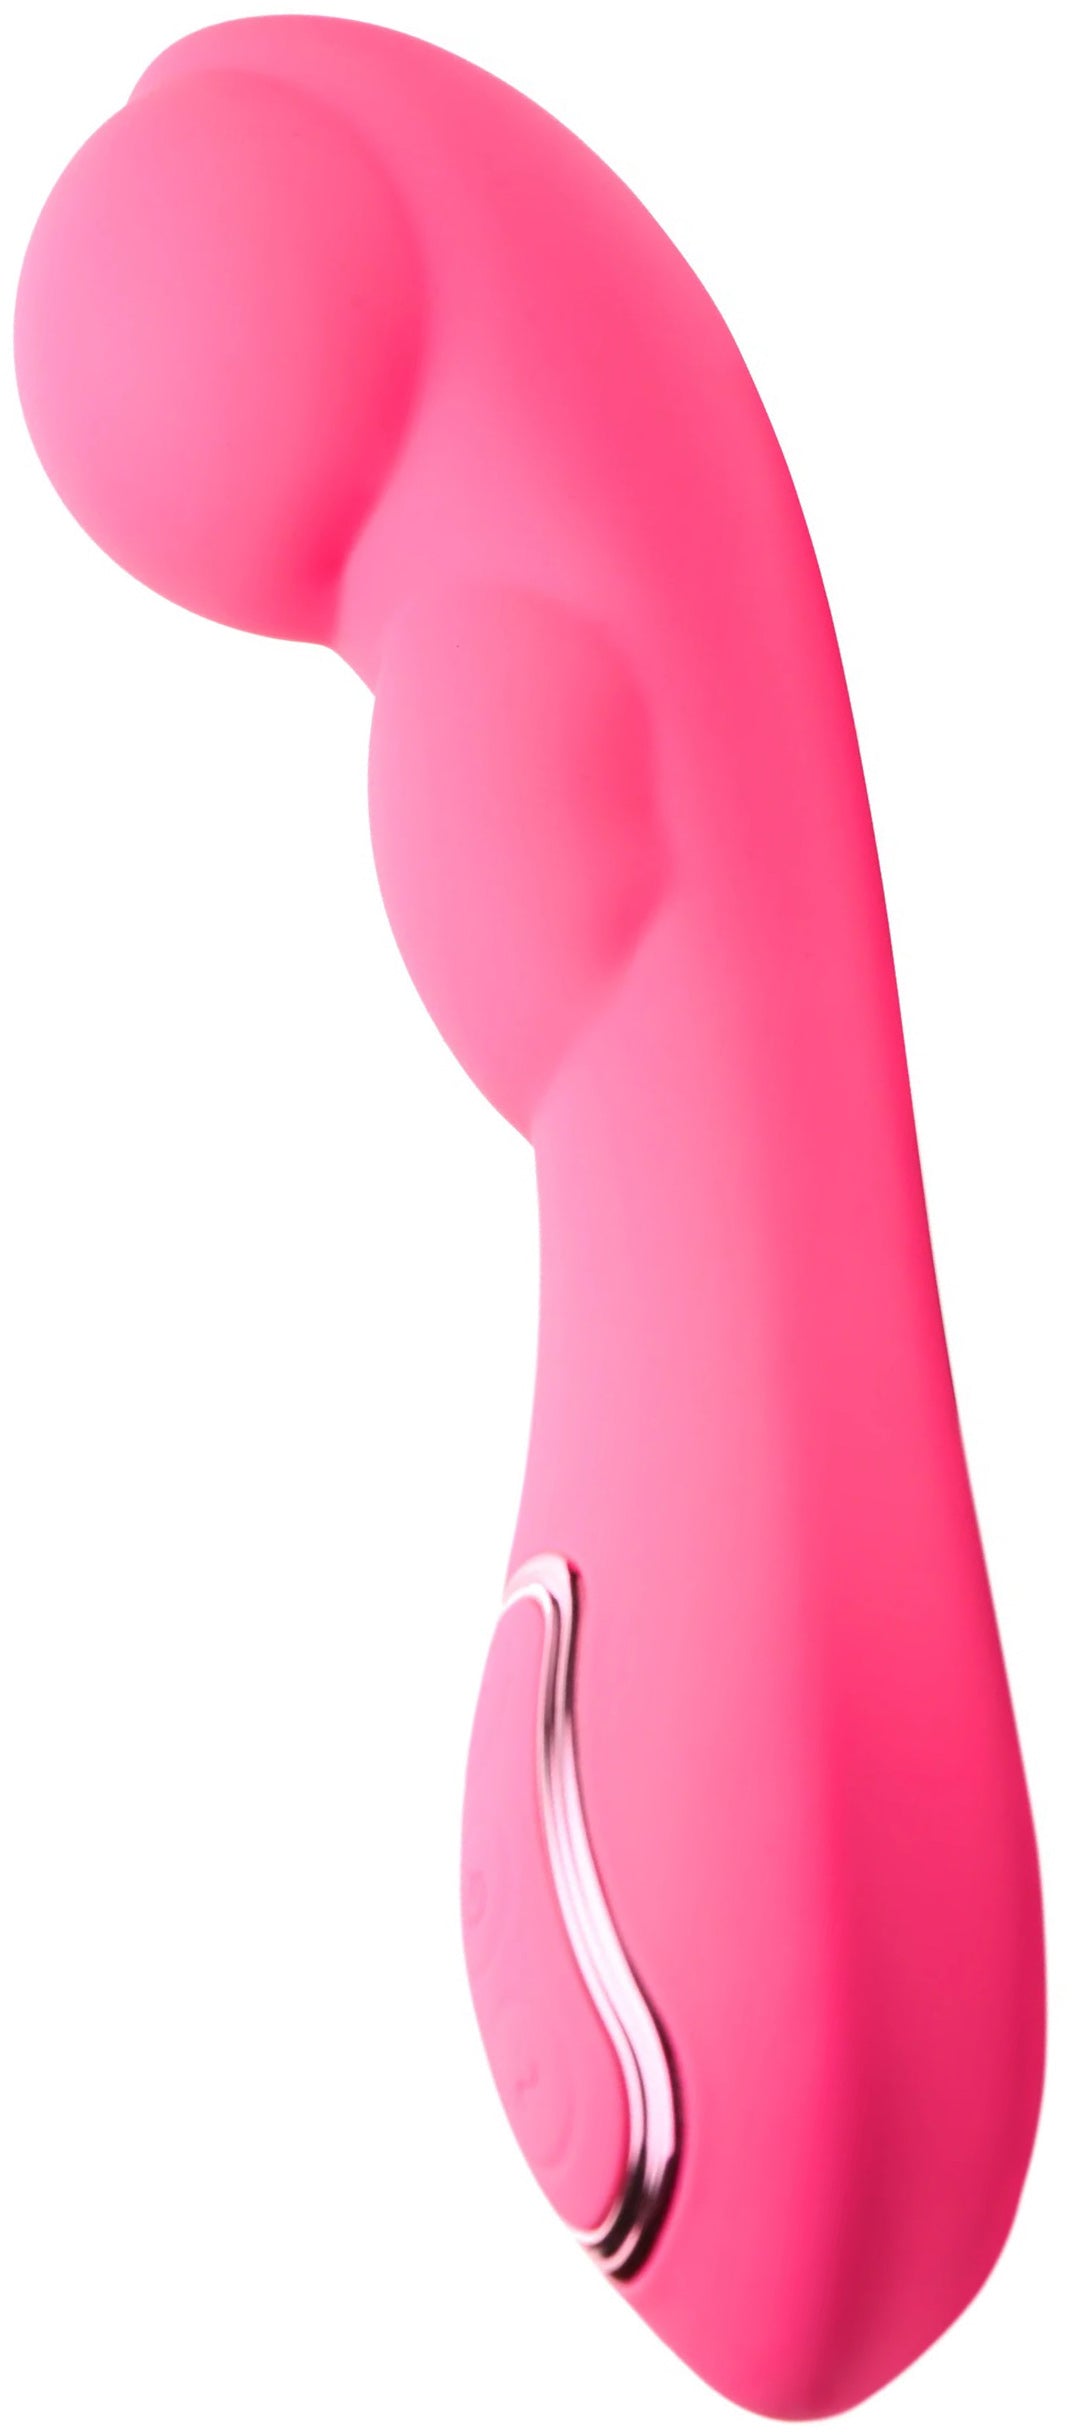 Extreme-G Inflating G-Spot Silicone Vibrator -  Pink-6